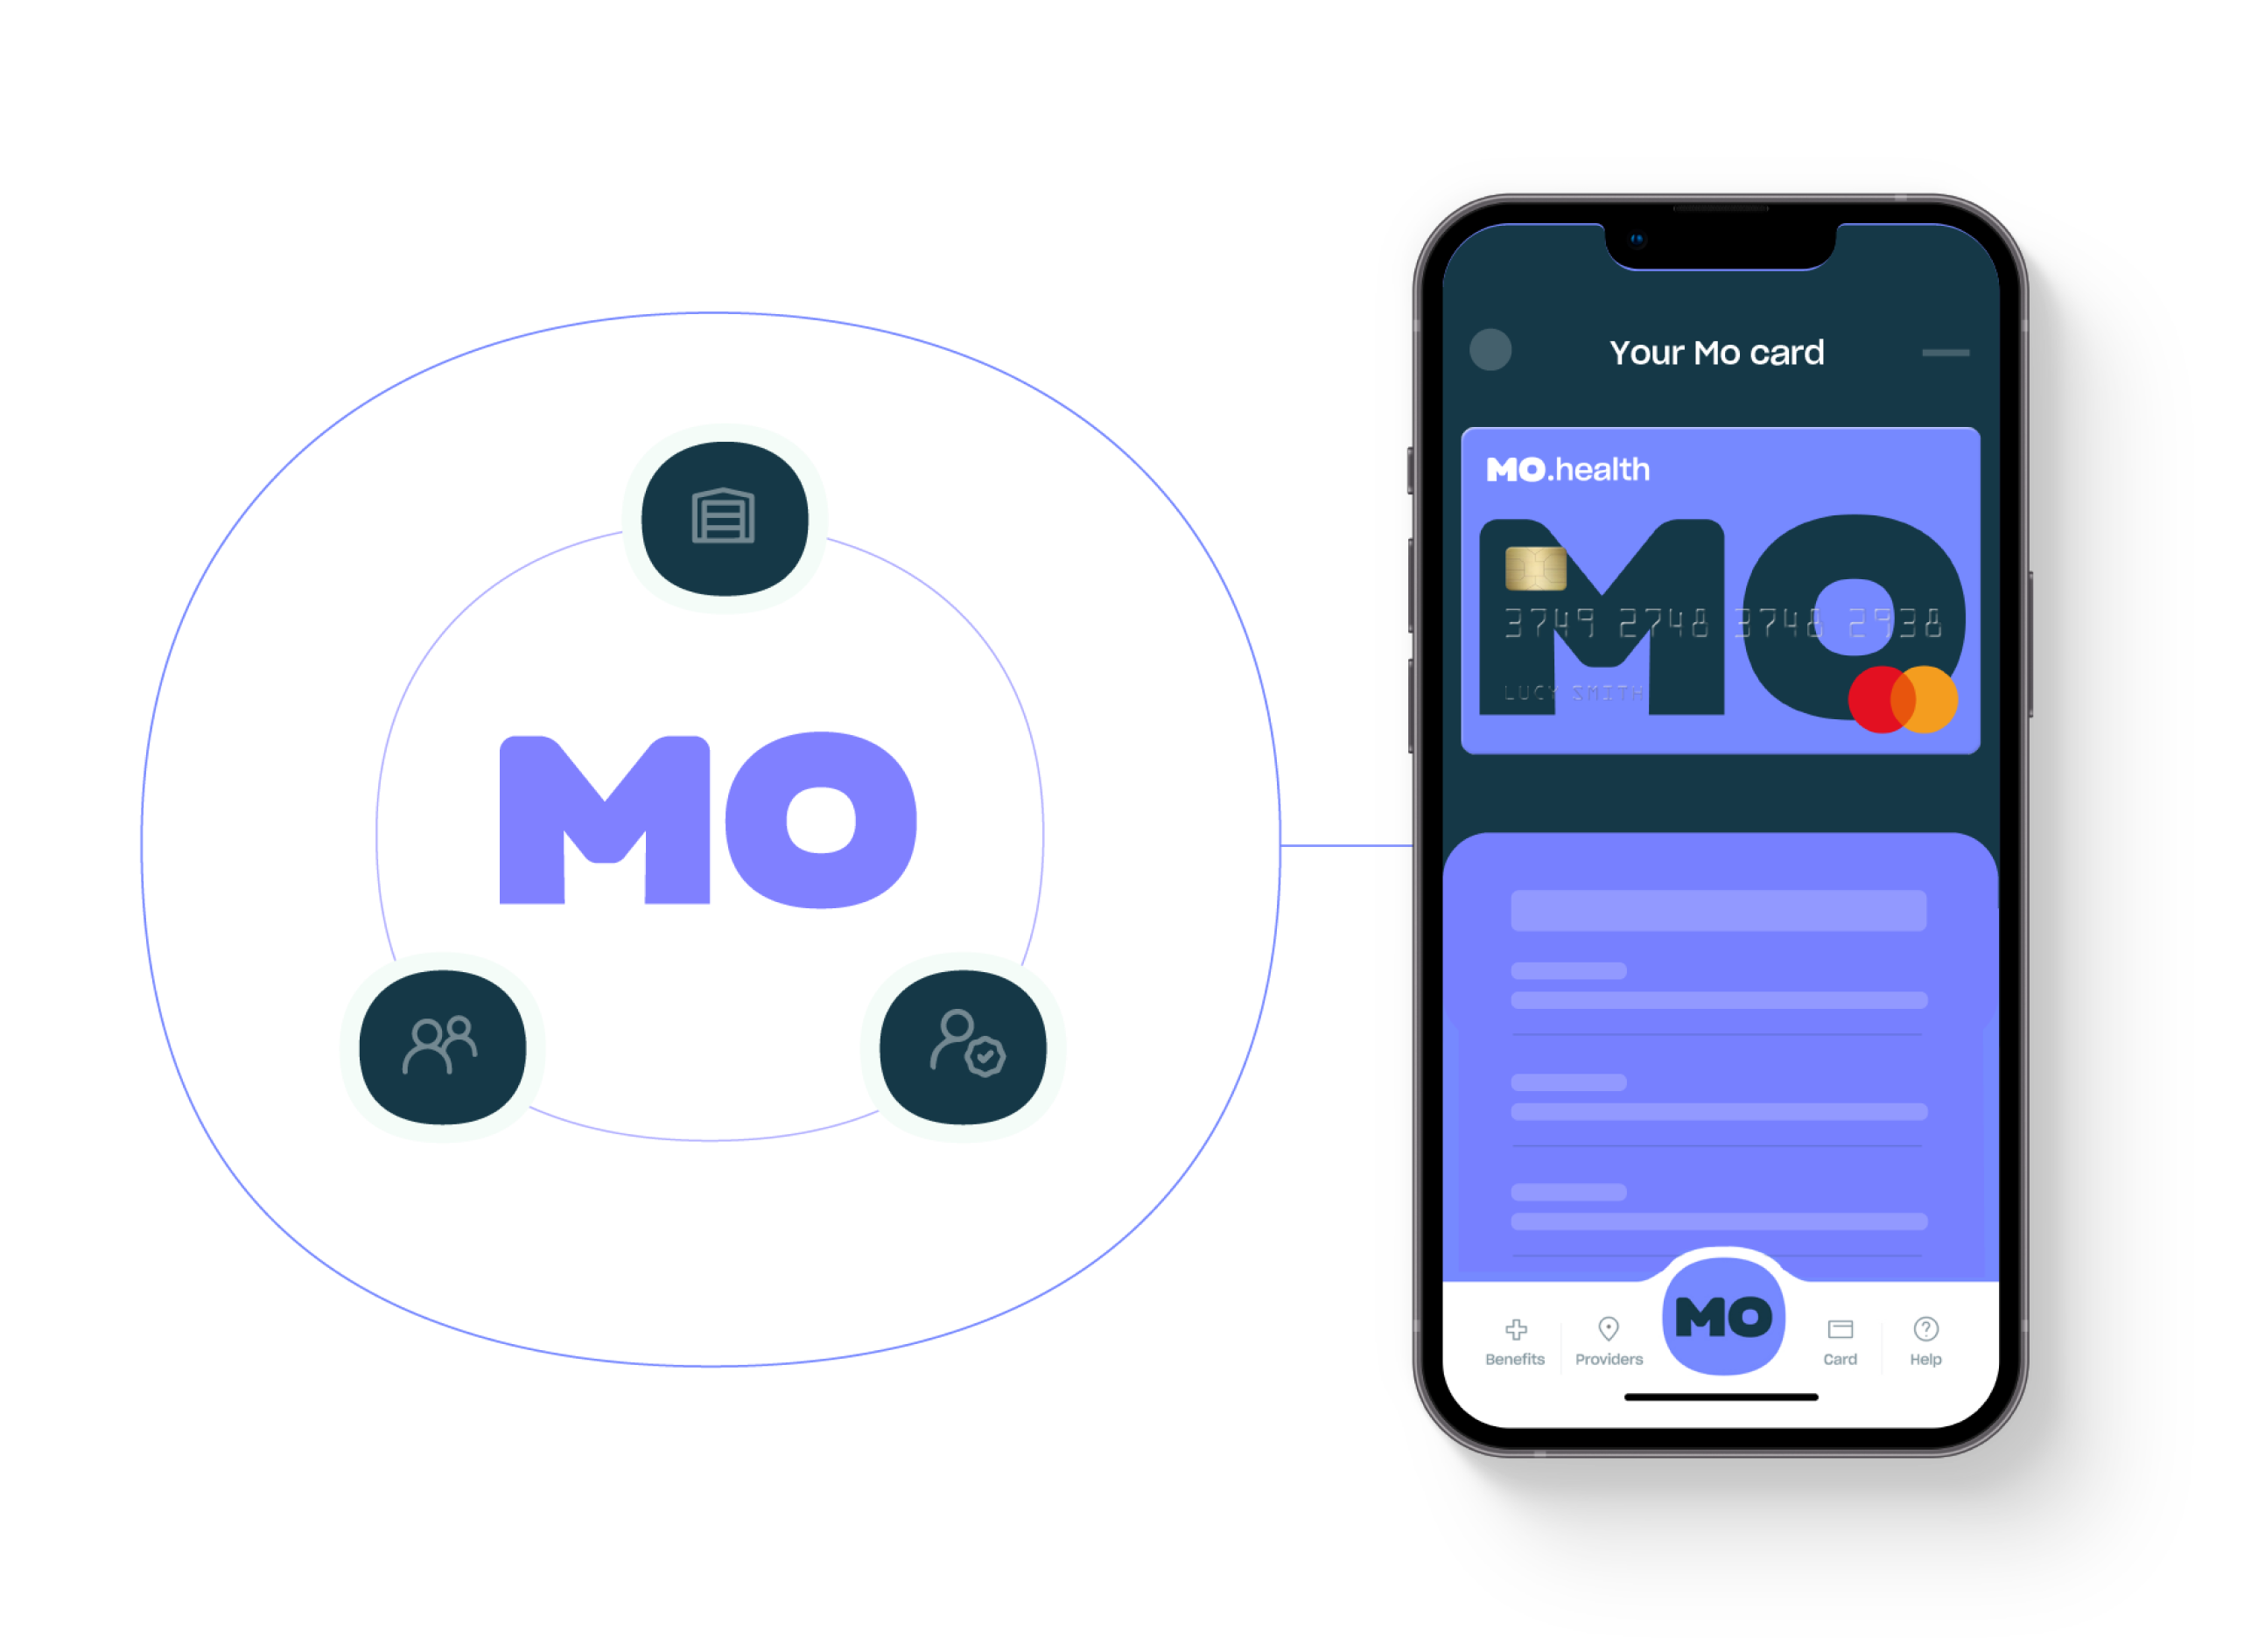 Diagram of the MO logo connecting to a mobile phone with the MO.health app open